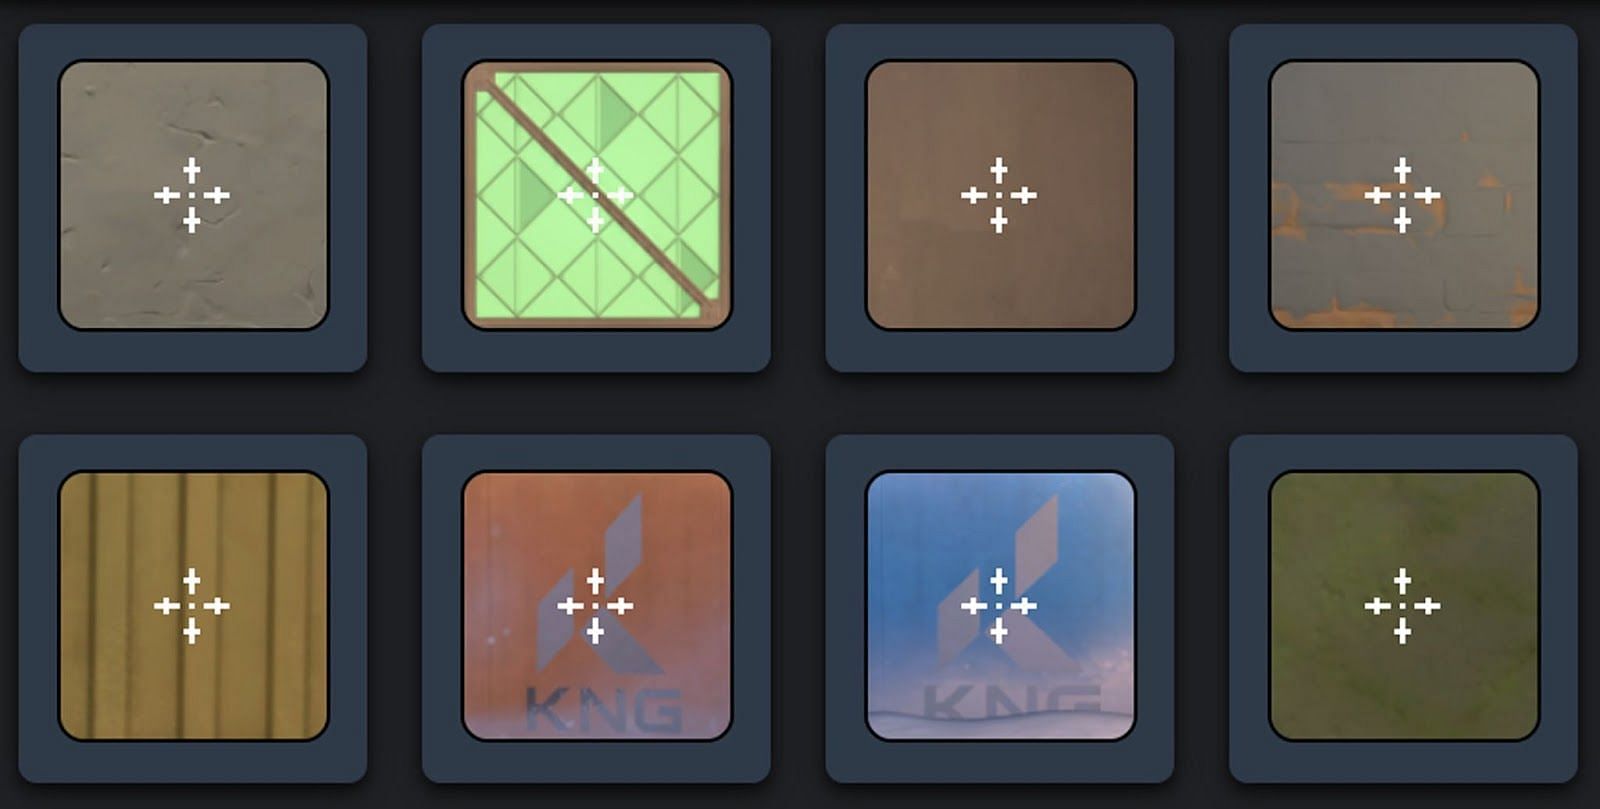 best crosshair color for valorant